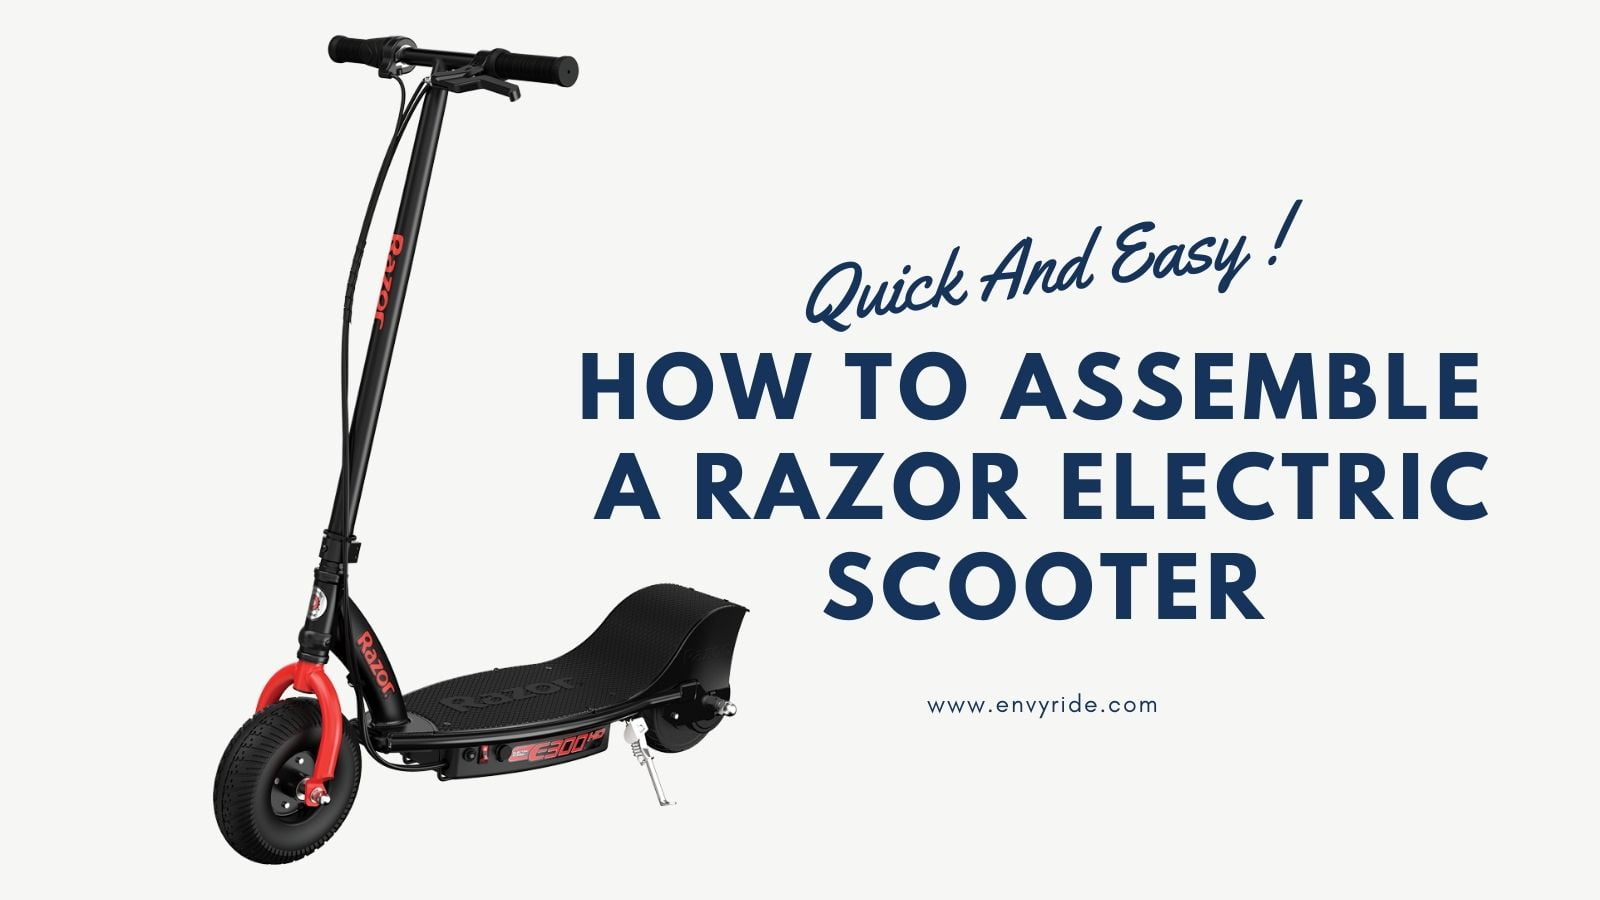 A Razor Electric Scooter